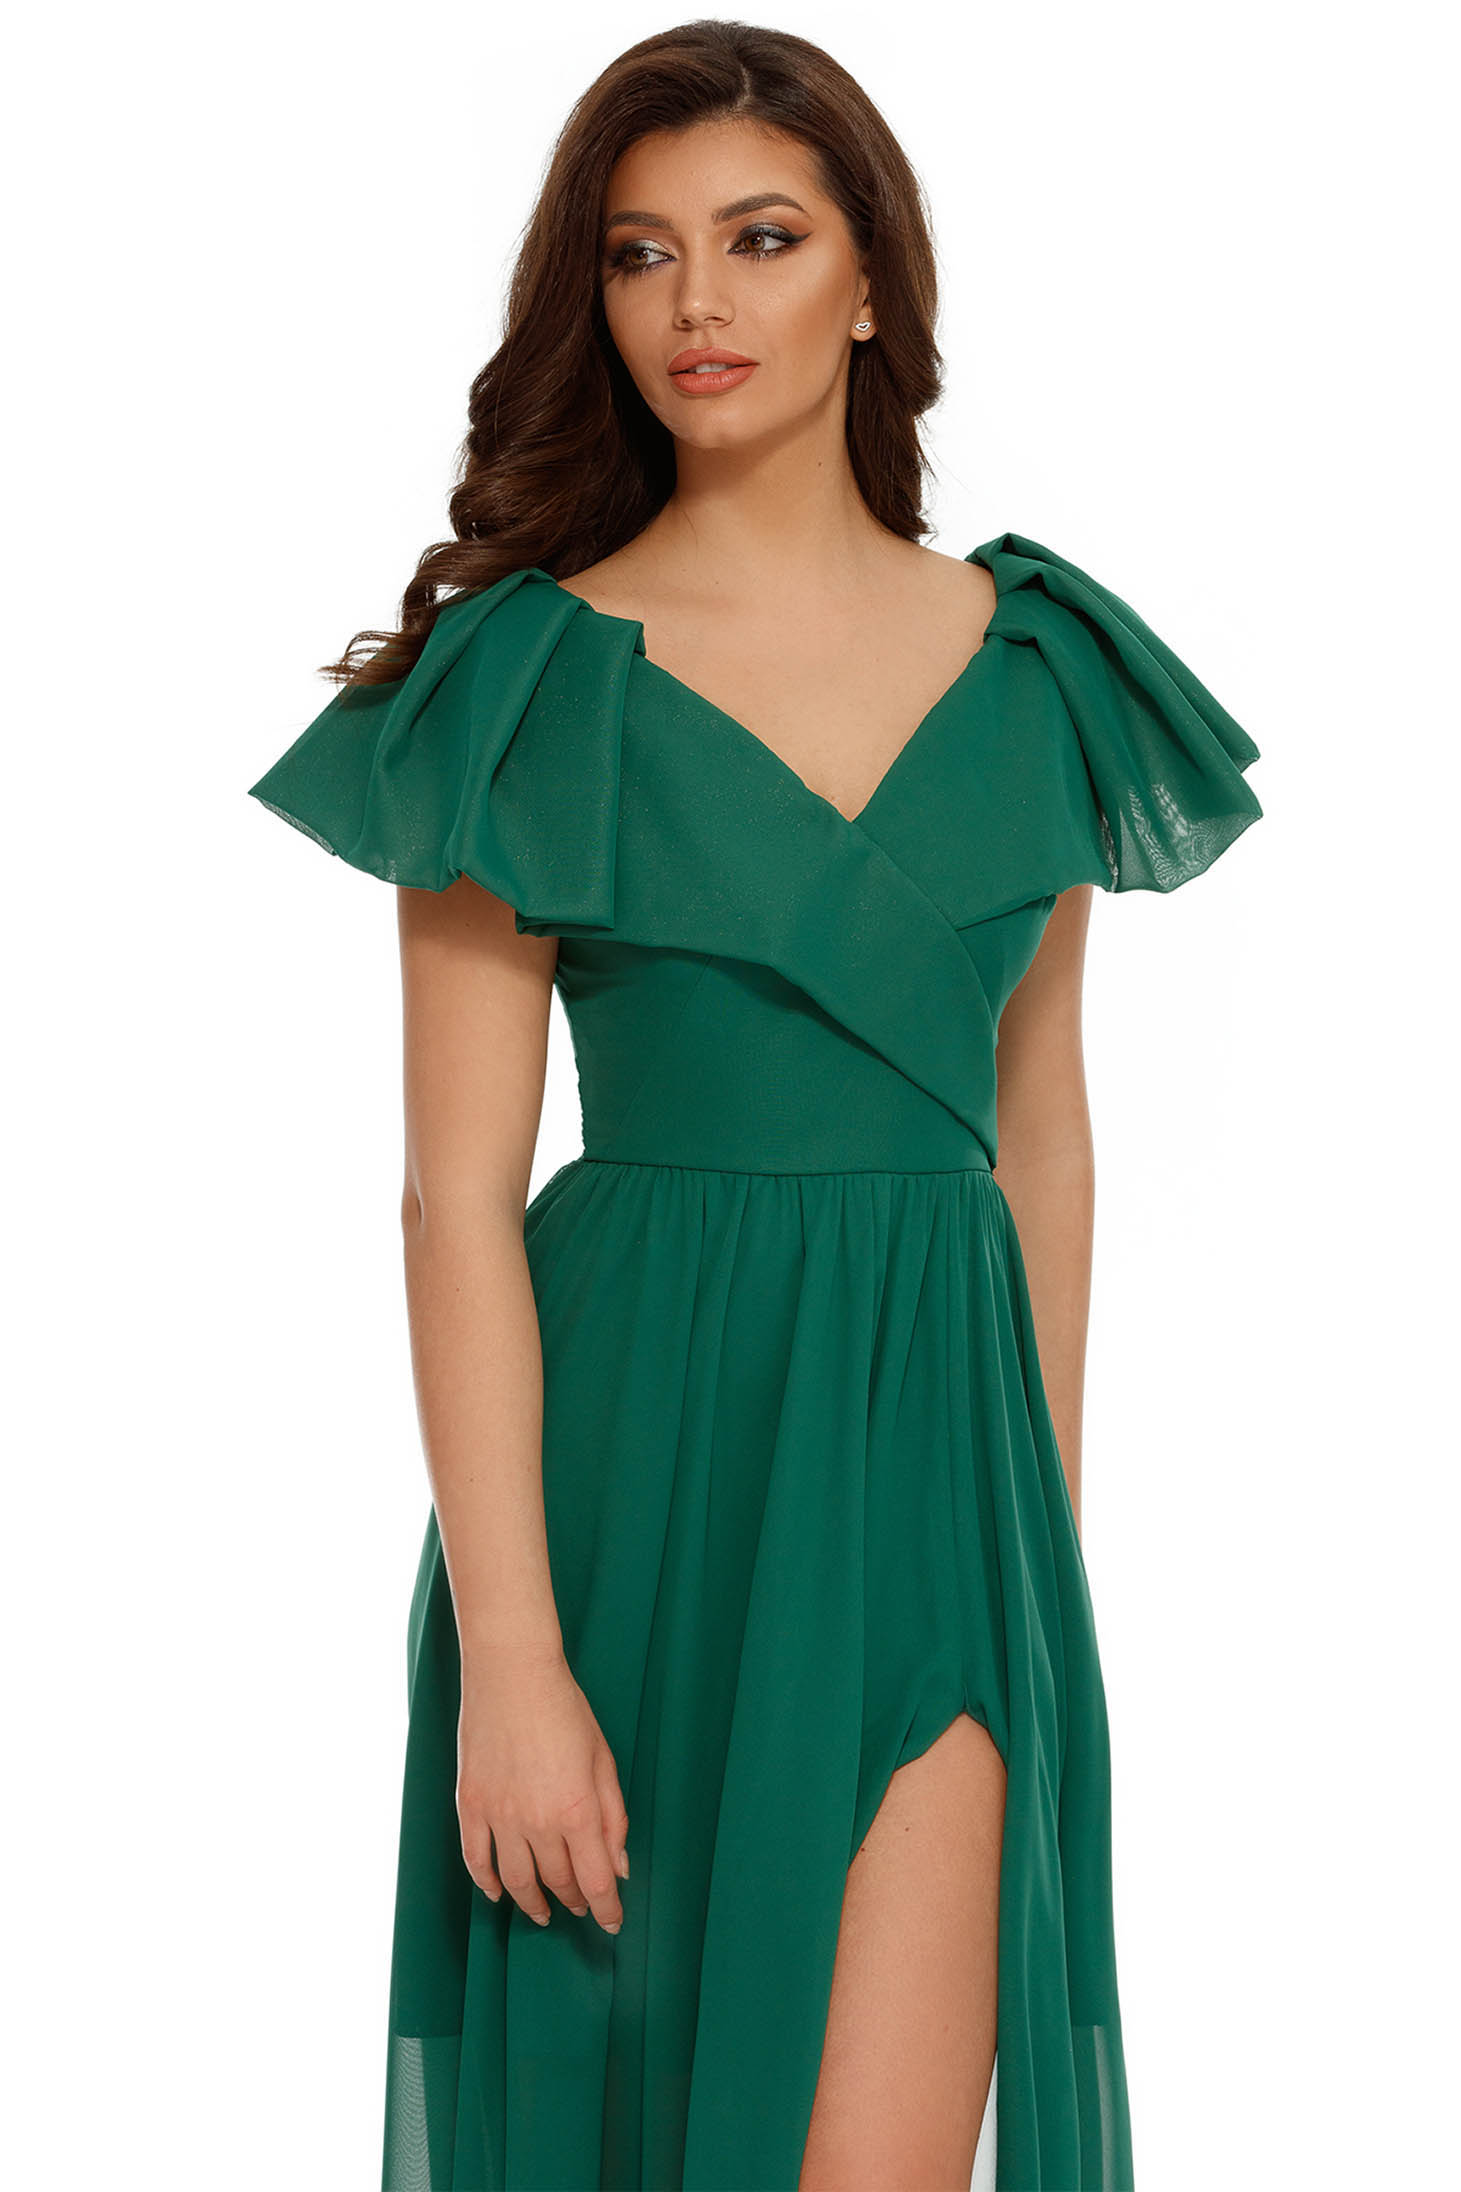 Green occasional dress voile fabric with inside lining with ruffle details